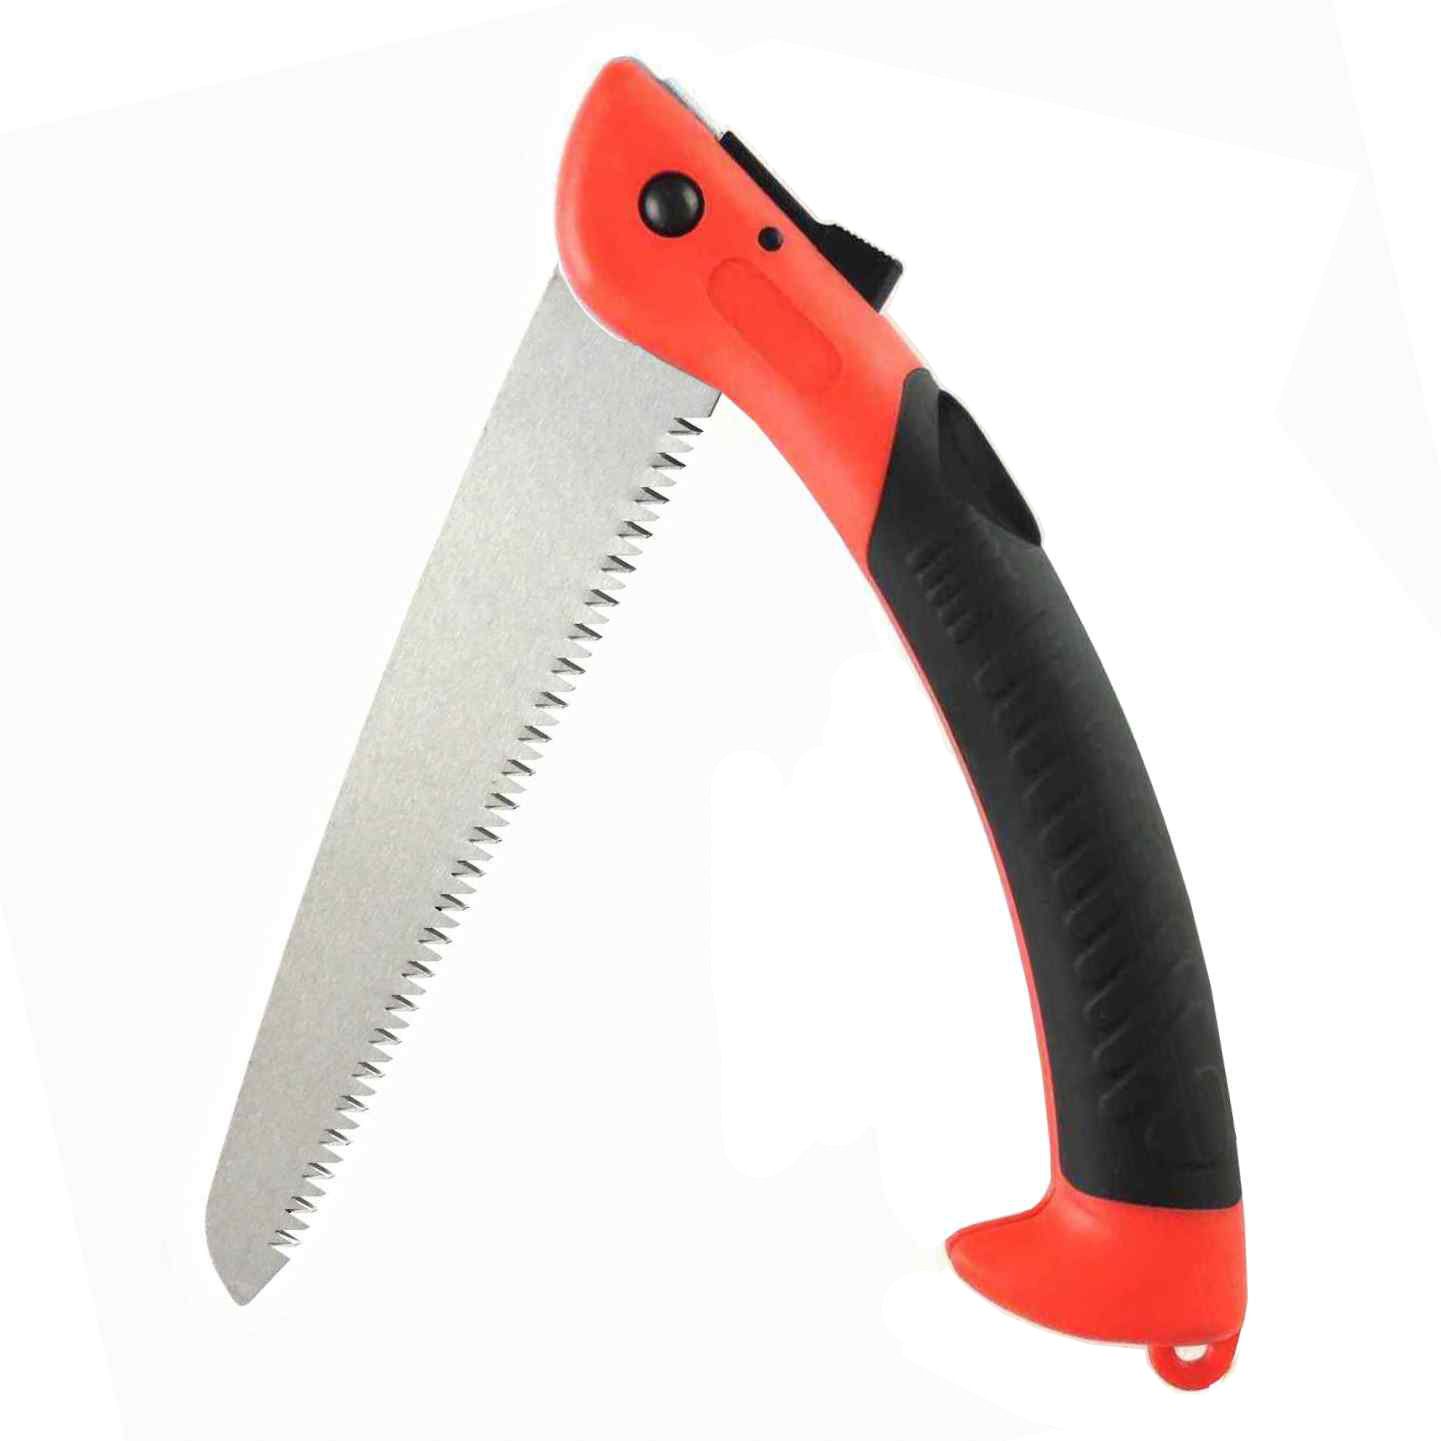 Gardening Saws Straight Blade Folding Pruning Hand Saw | Soteck - A professional  manufacturer of a wide variety of high quality hand-operated saws: pruning  saws, hand saws, hacksaws, utility knives, pruning shears.